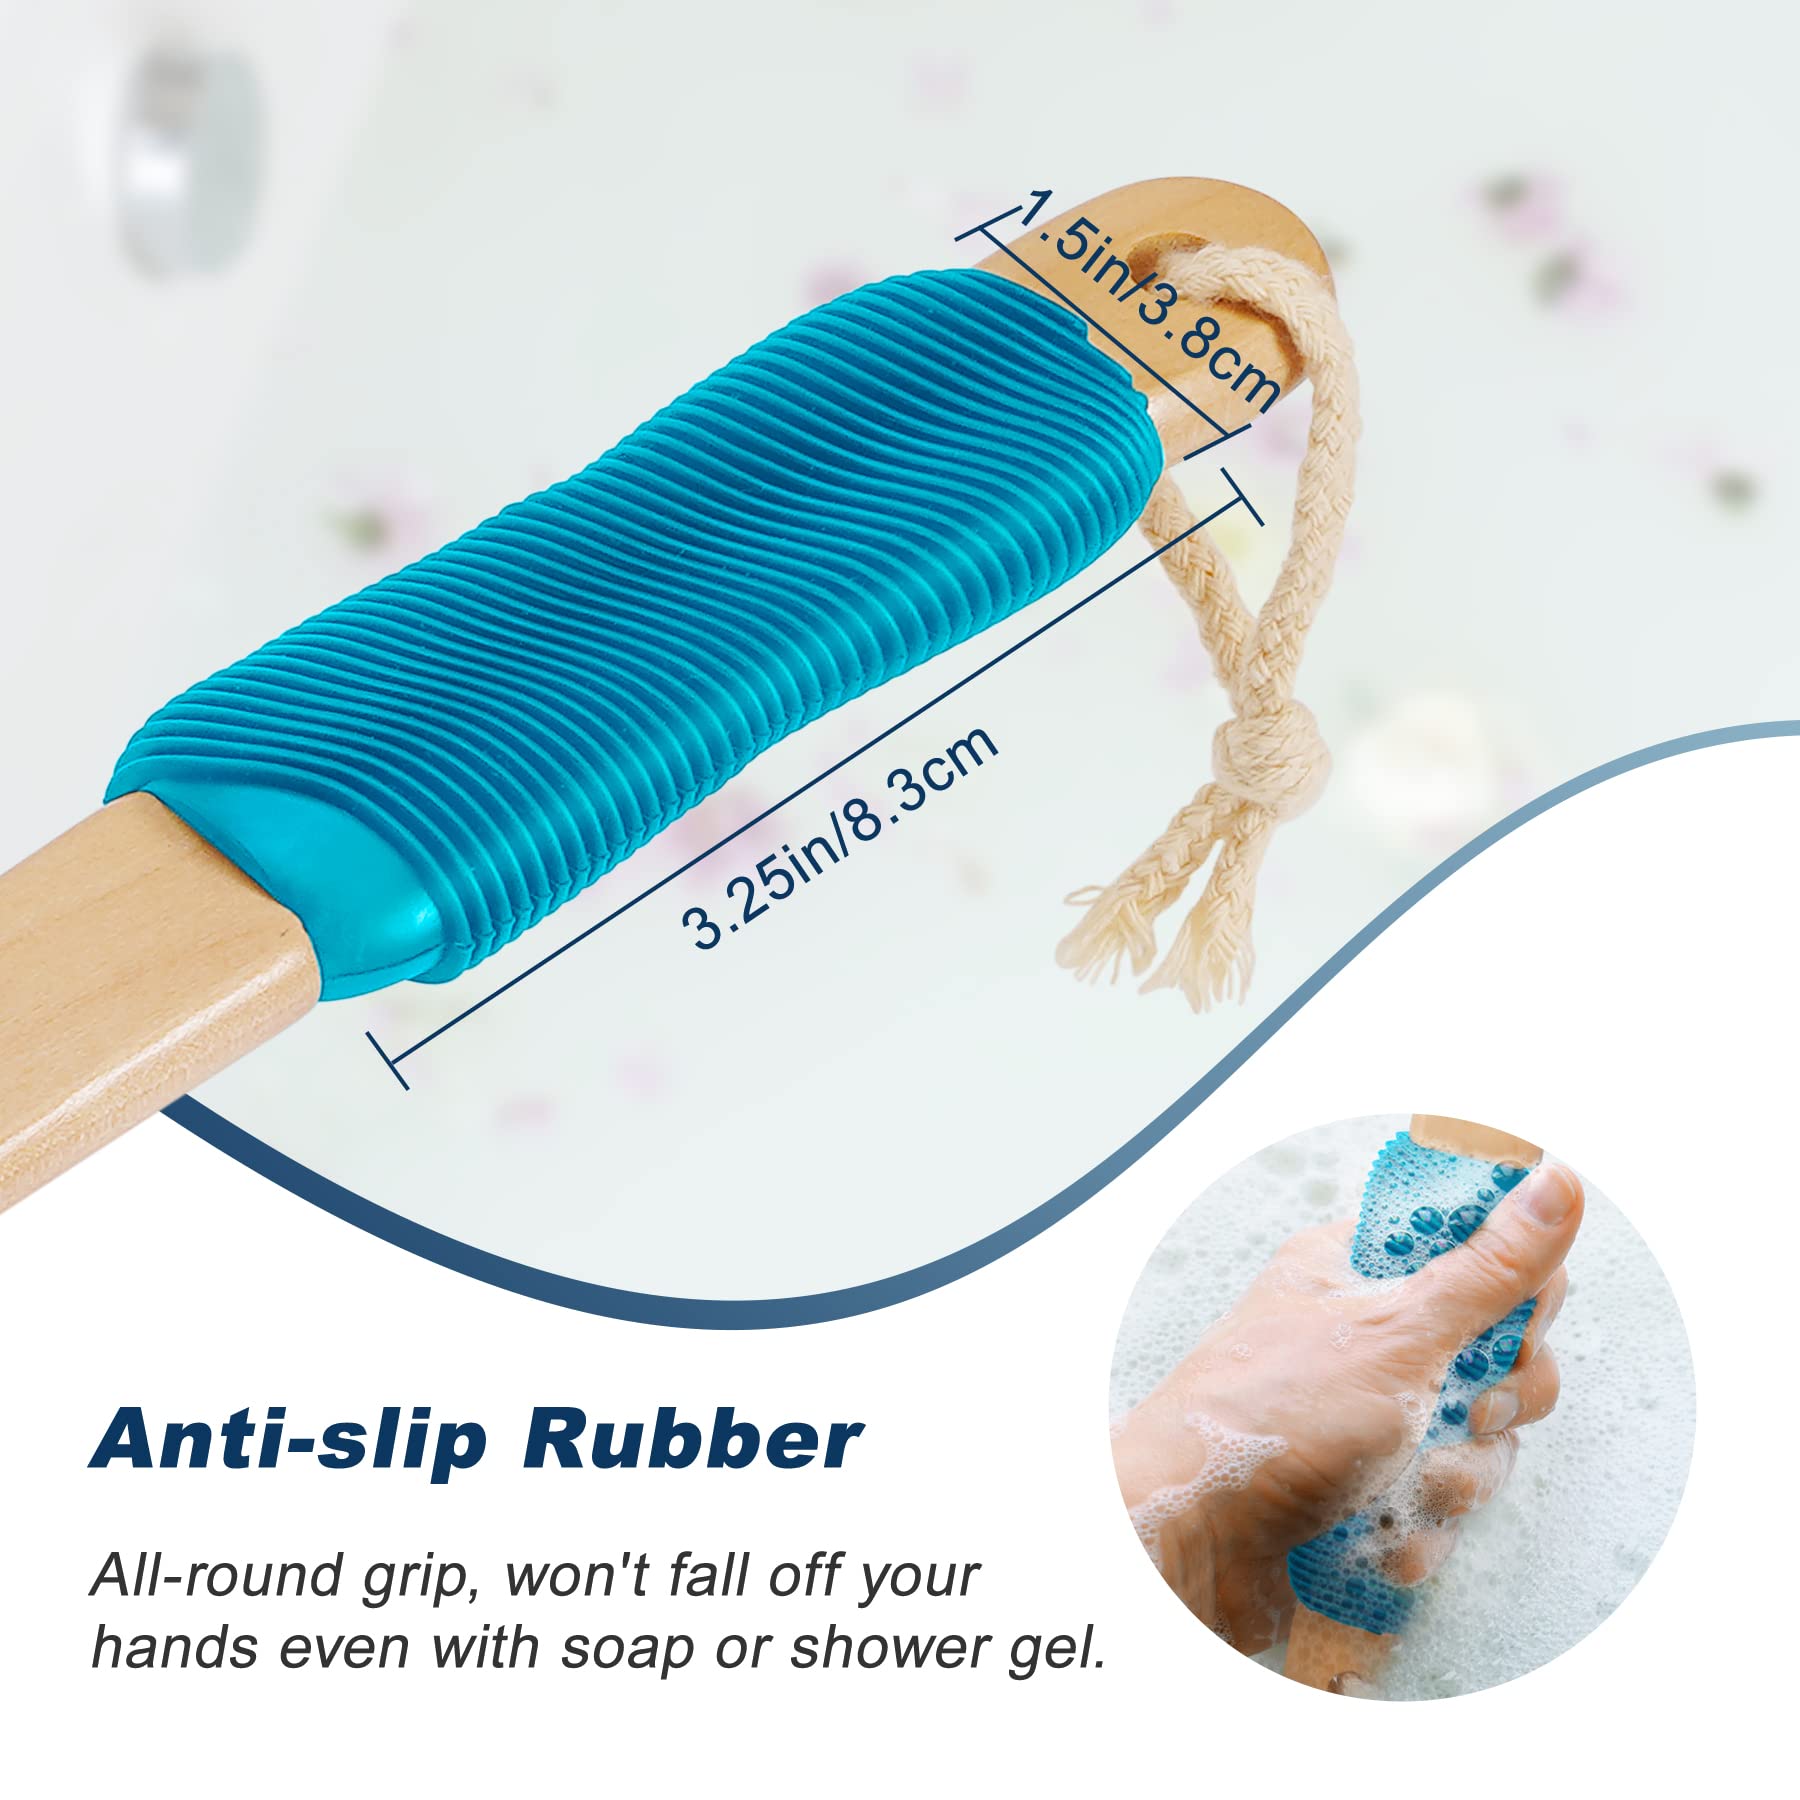 KIPRITII Ergonomically Back Scrubber for Shower - Double-Sided Back Brush Long Handle for Shower, Wet & Dry Brush for Cellulite and Lymphatic (Blue)